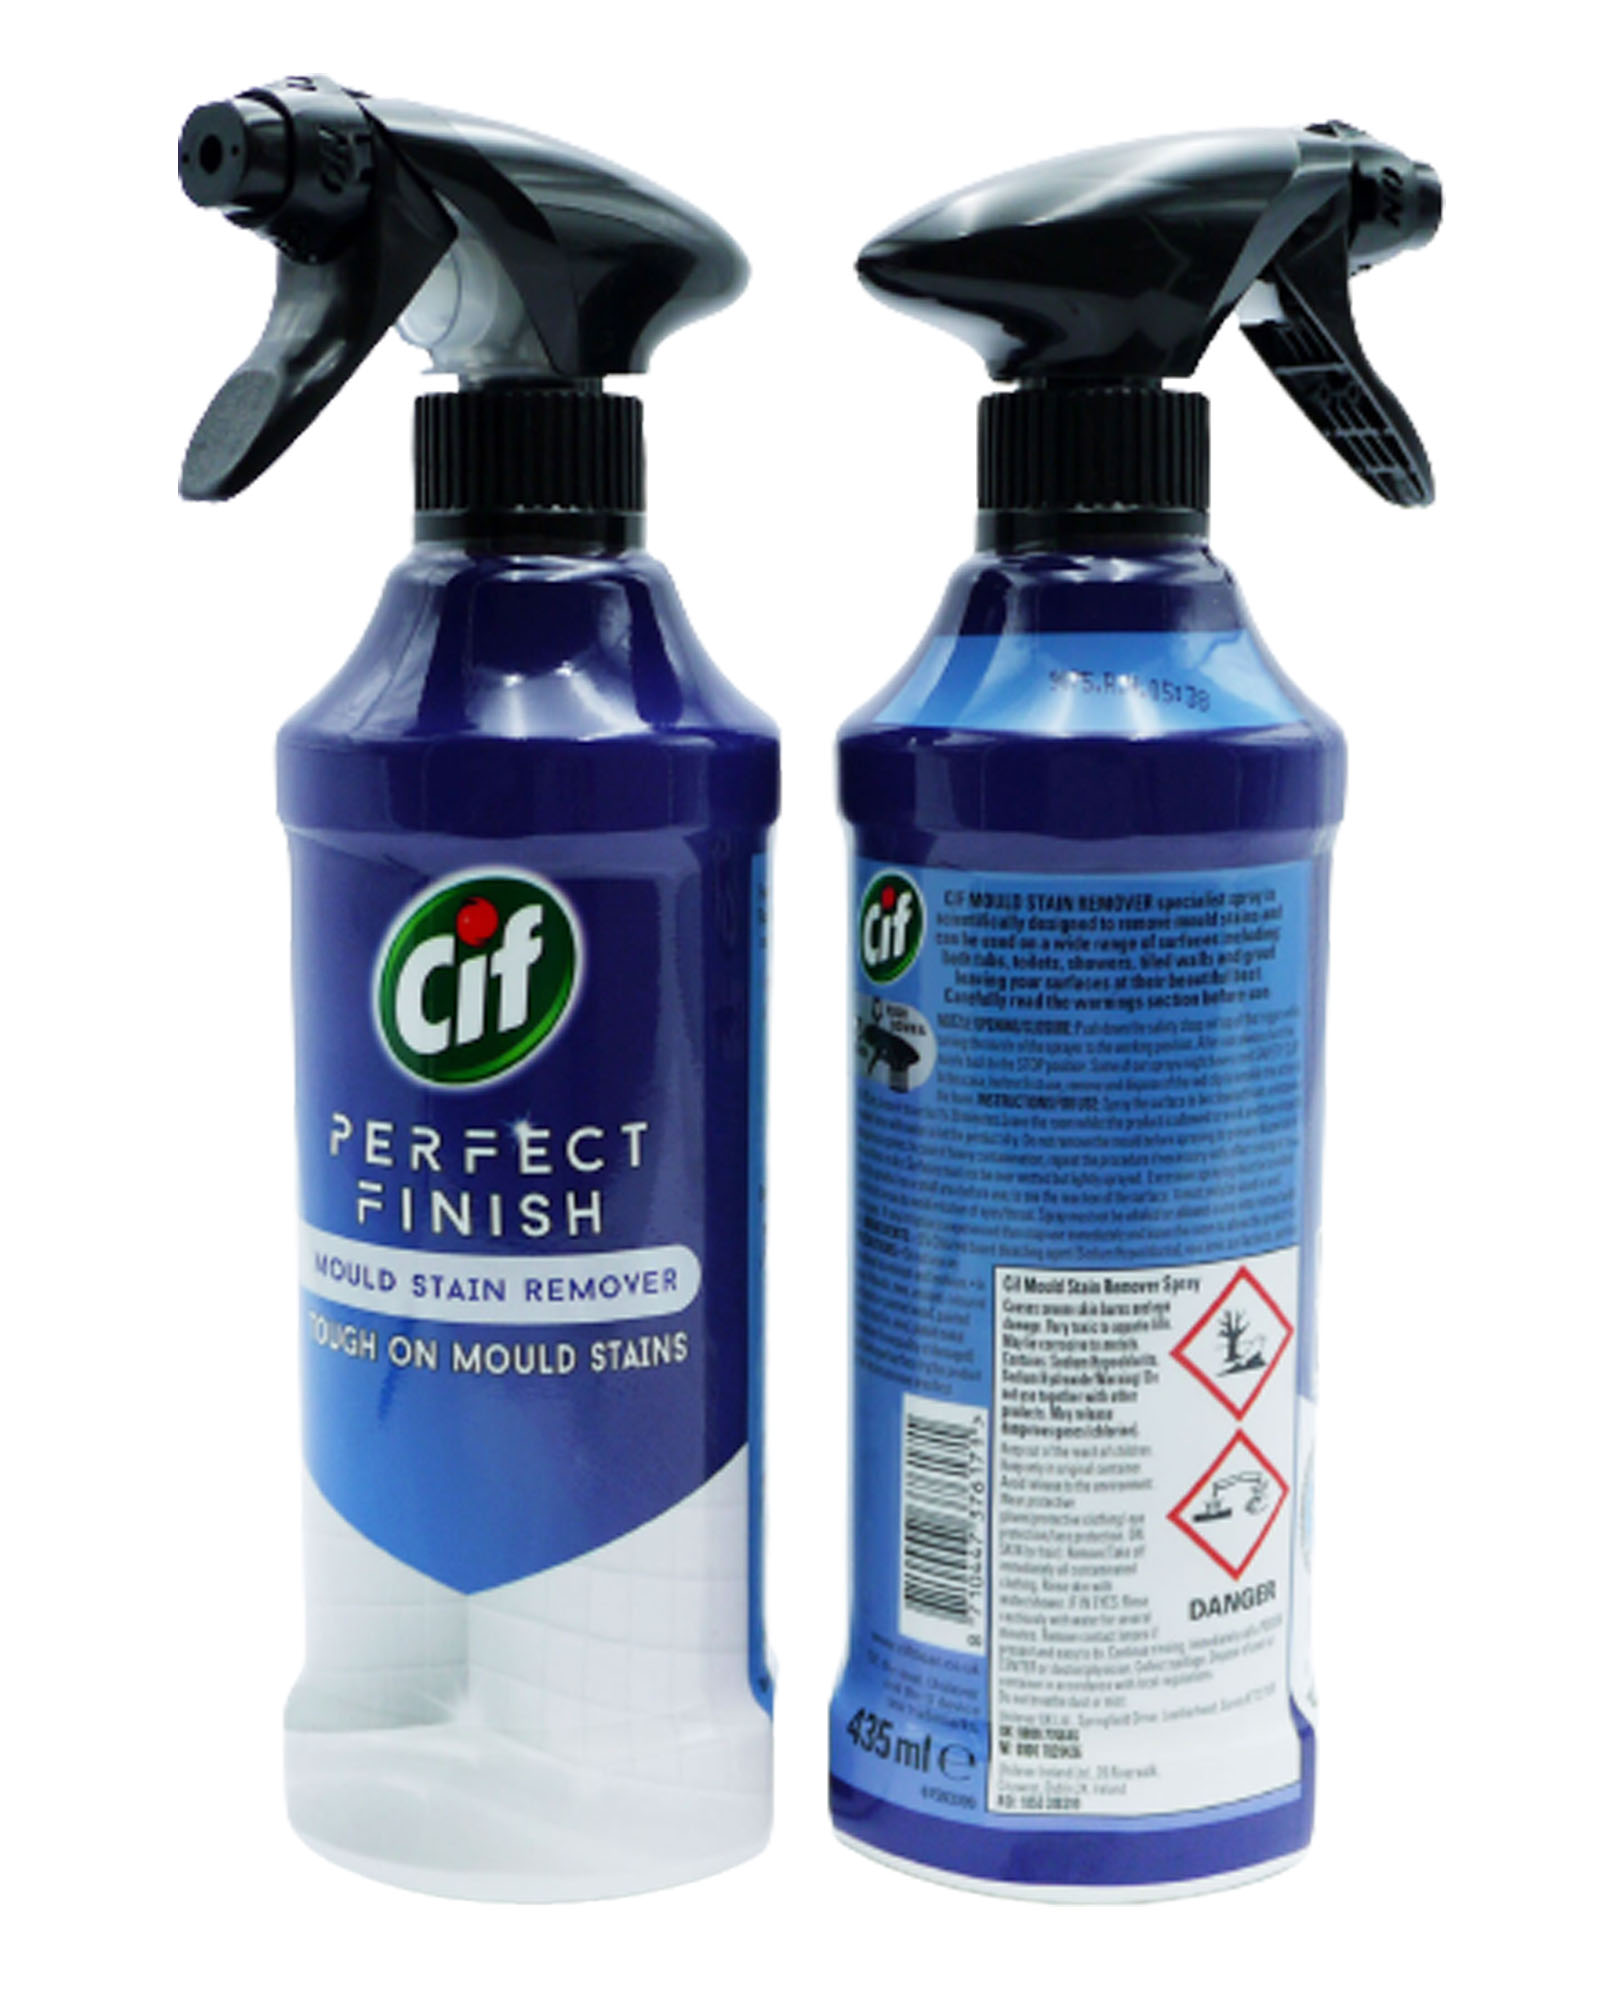 Cif Mould Stain Remover Spray 435 ml